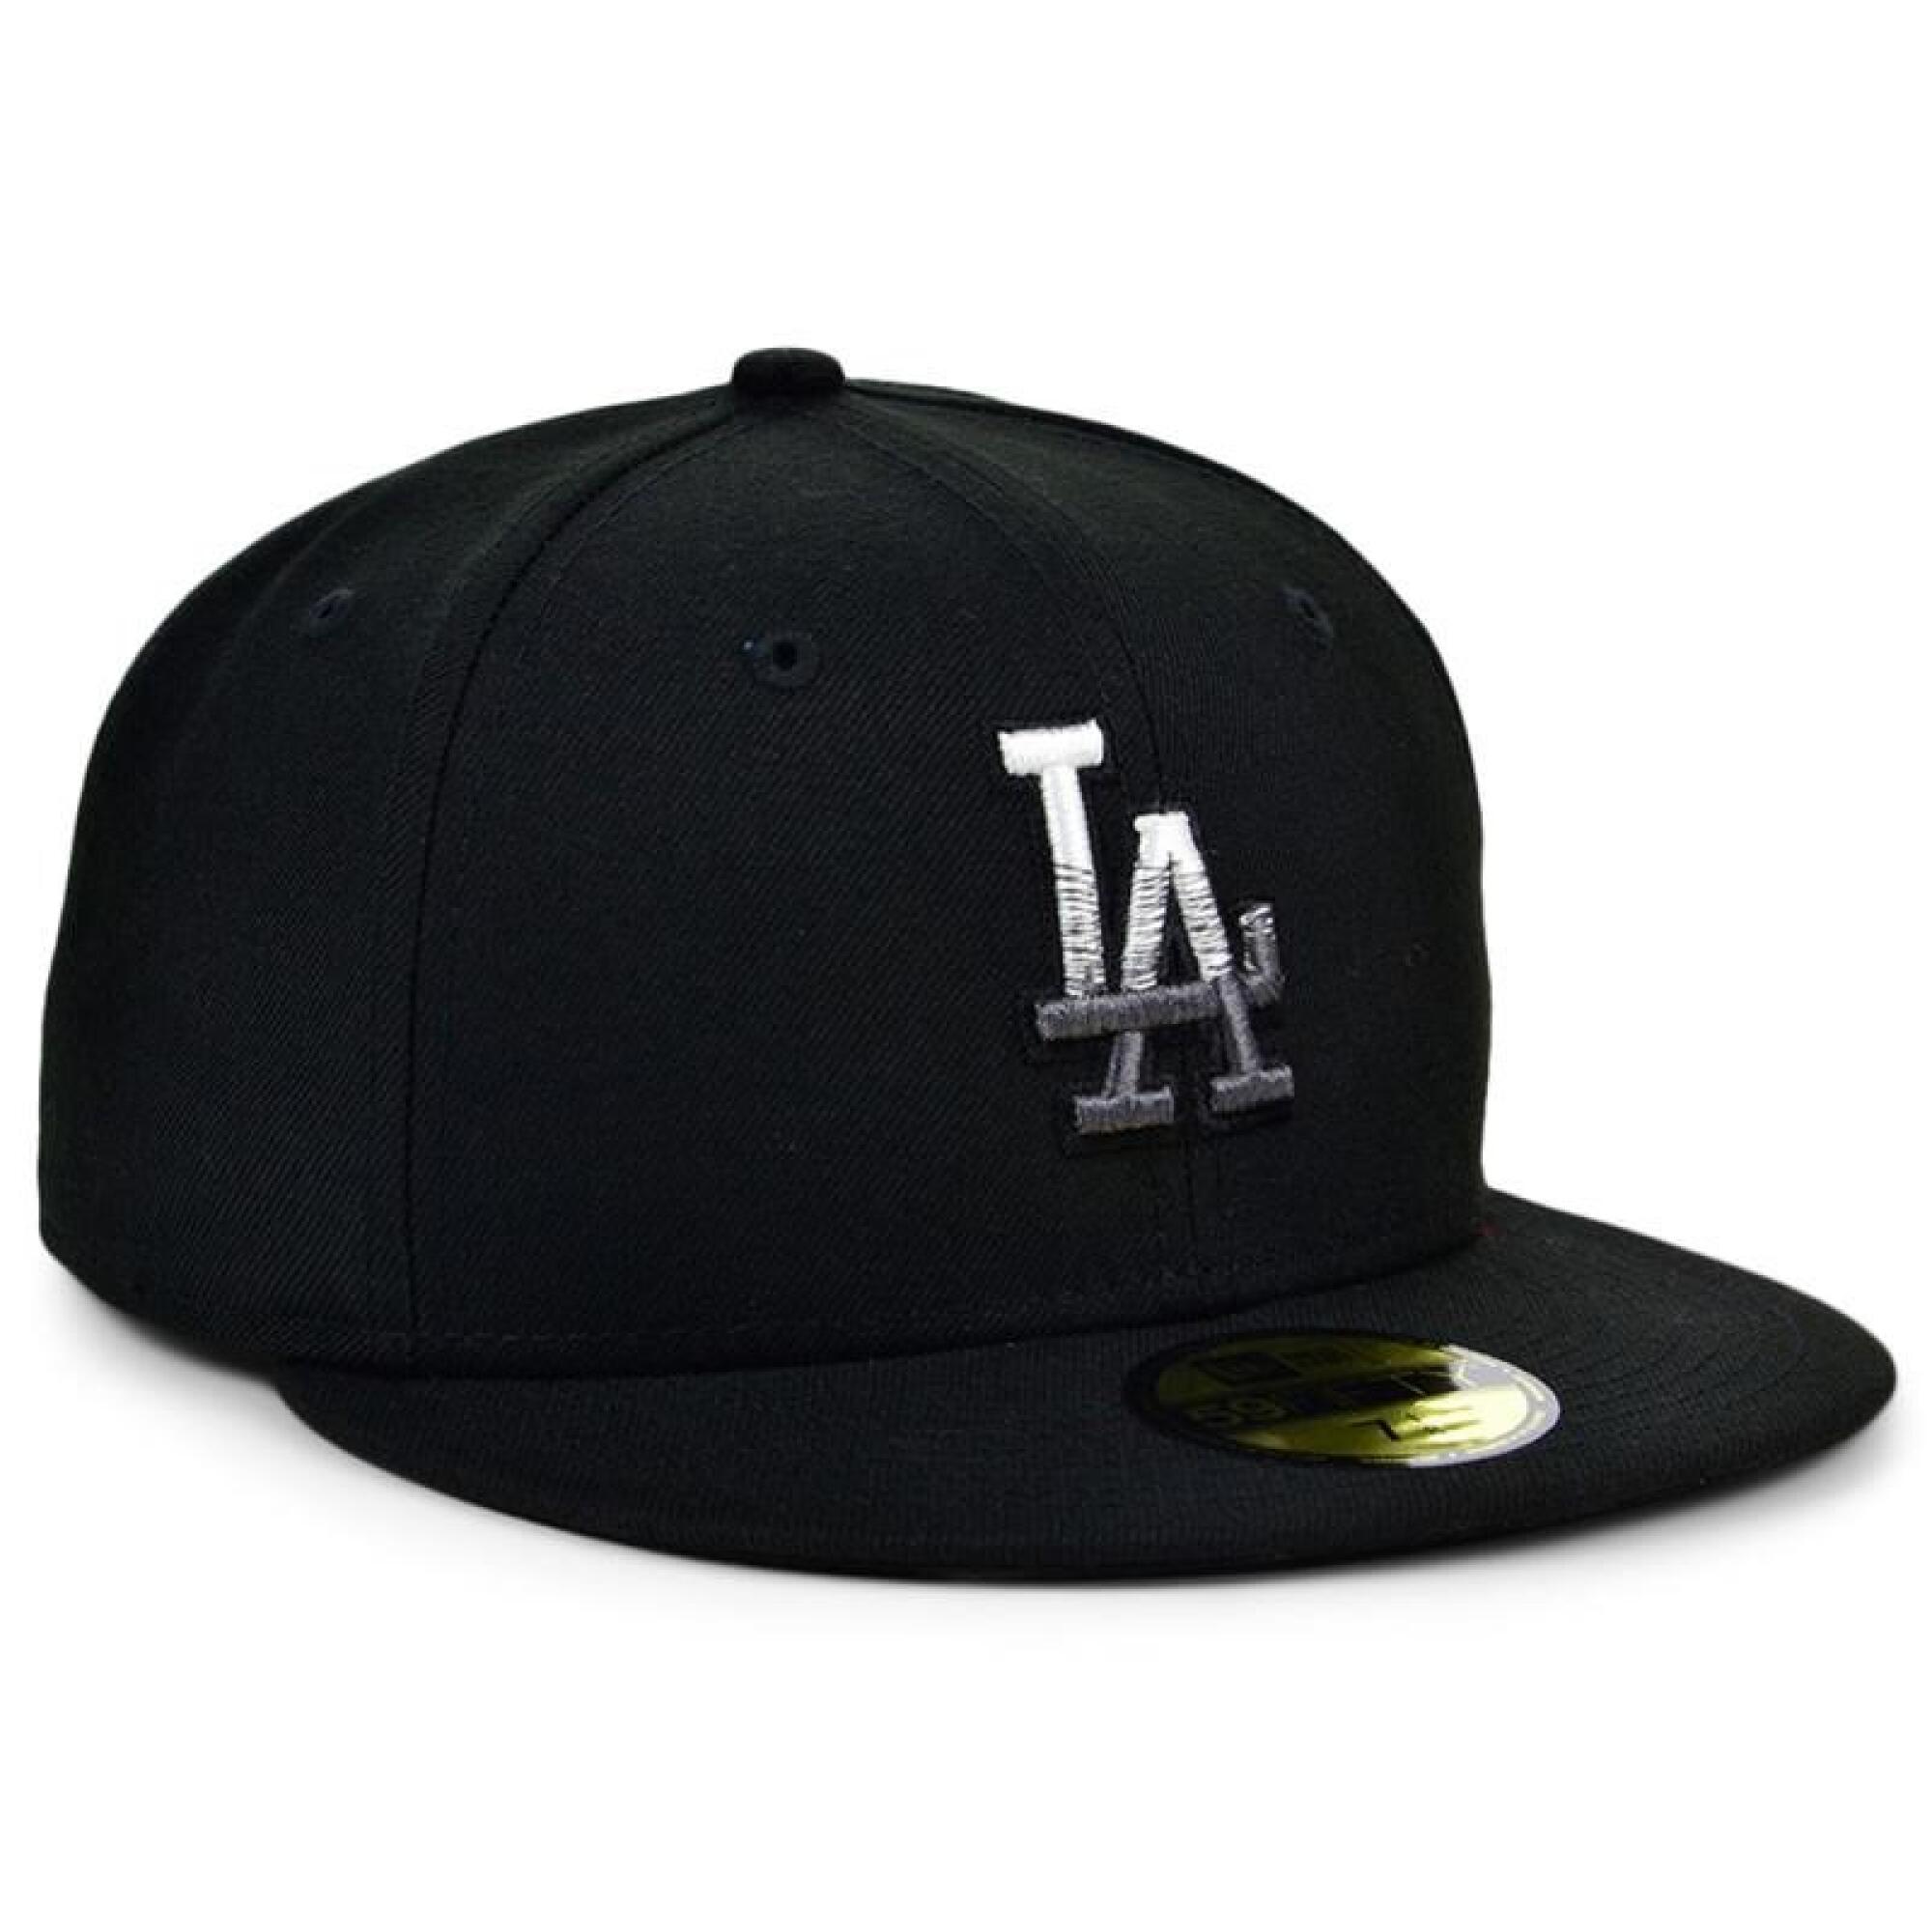 25 Dodger fashion caps in a wide range of colors are displayed side byside. 